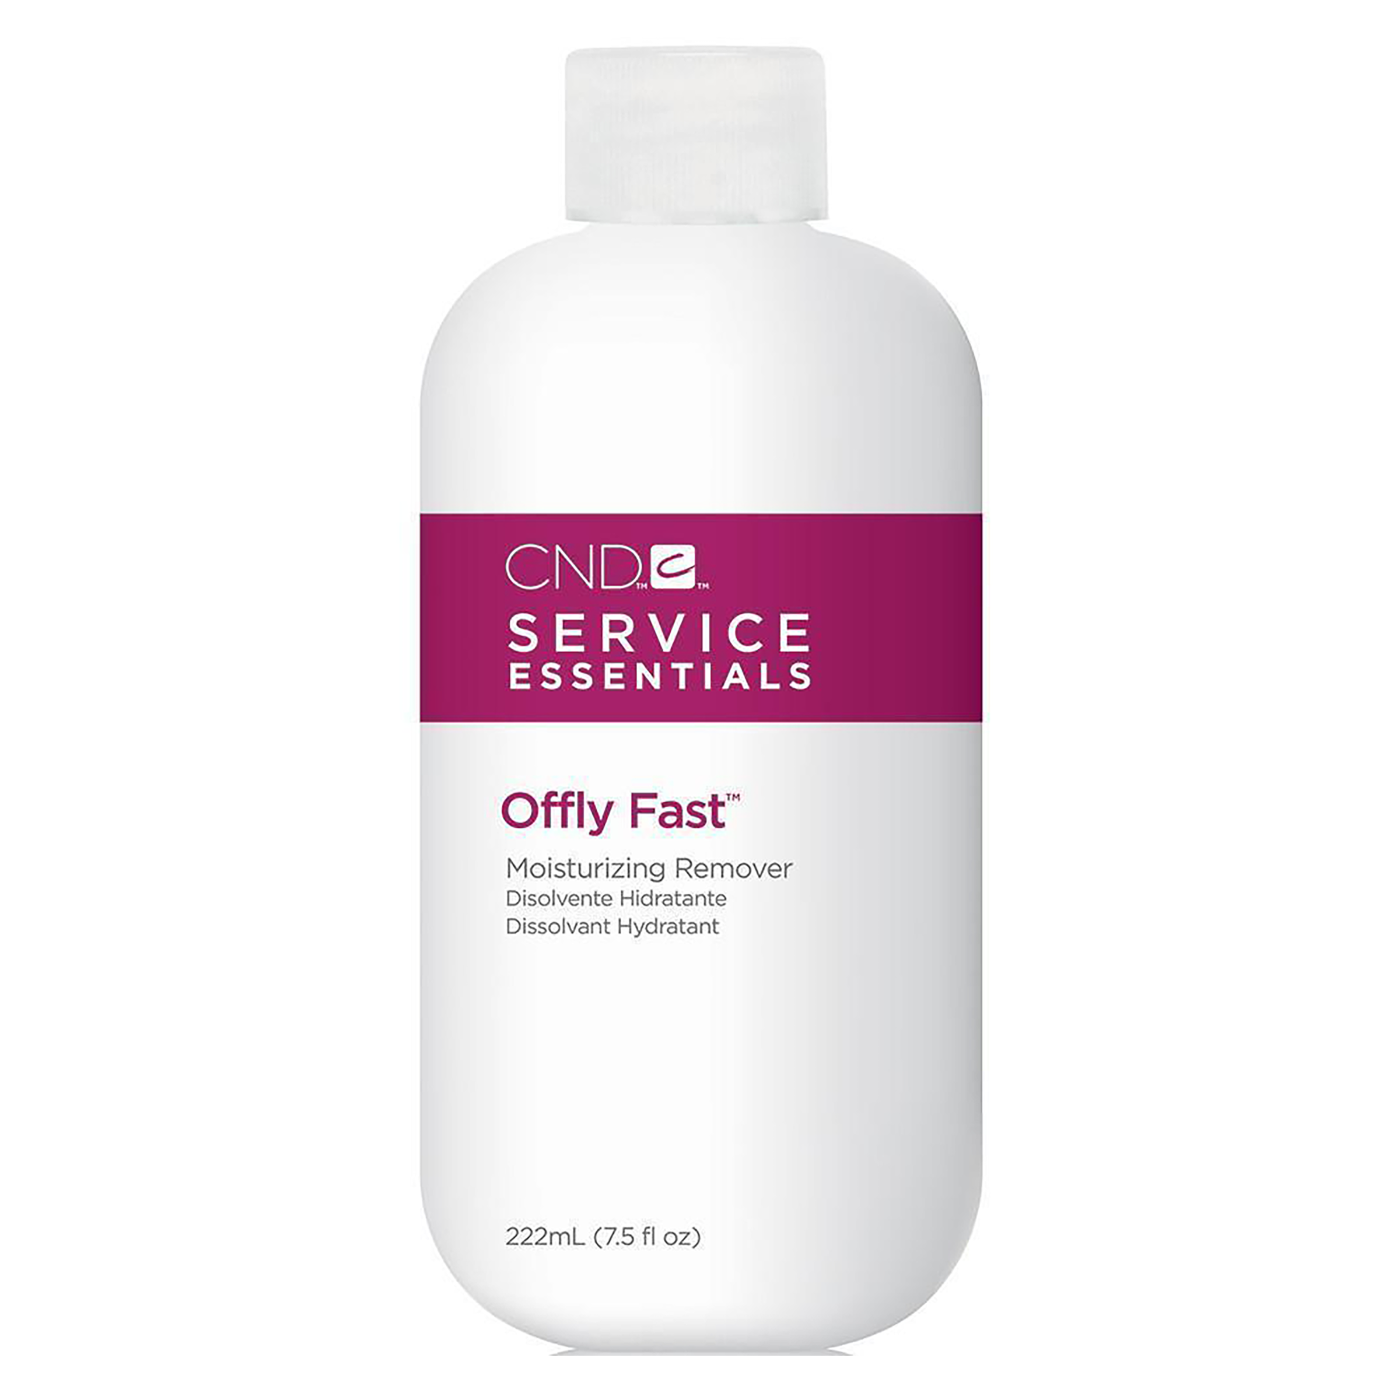 Offly Fast™ Moisturizing Remover